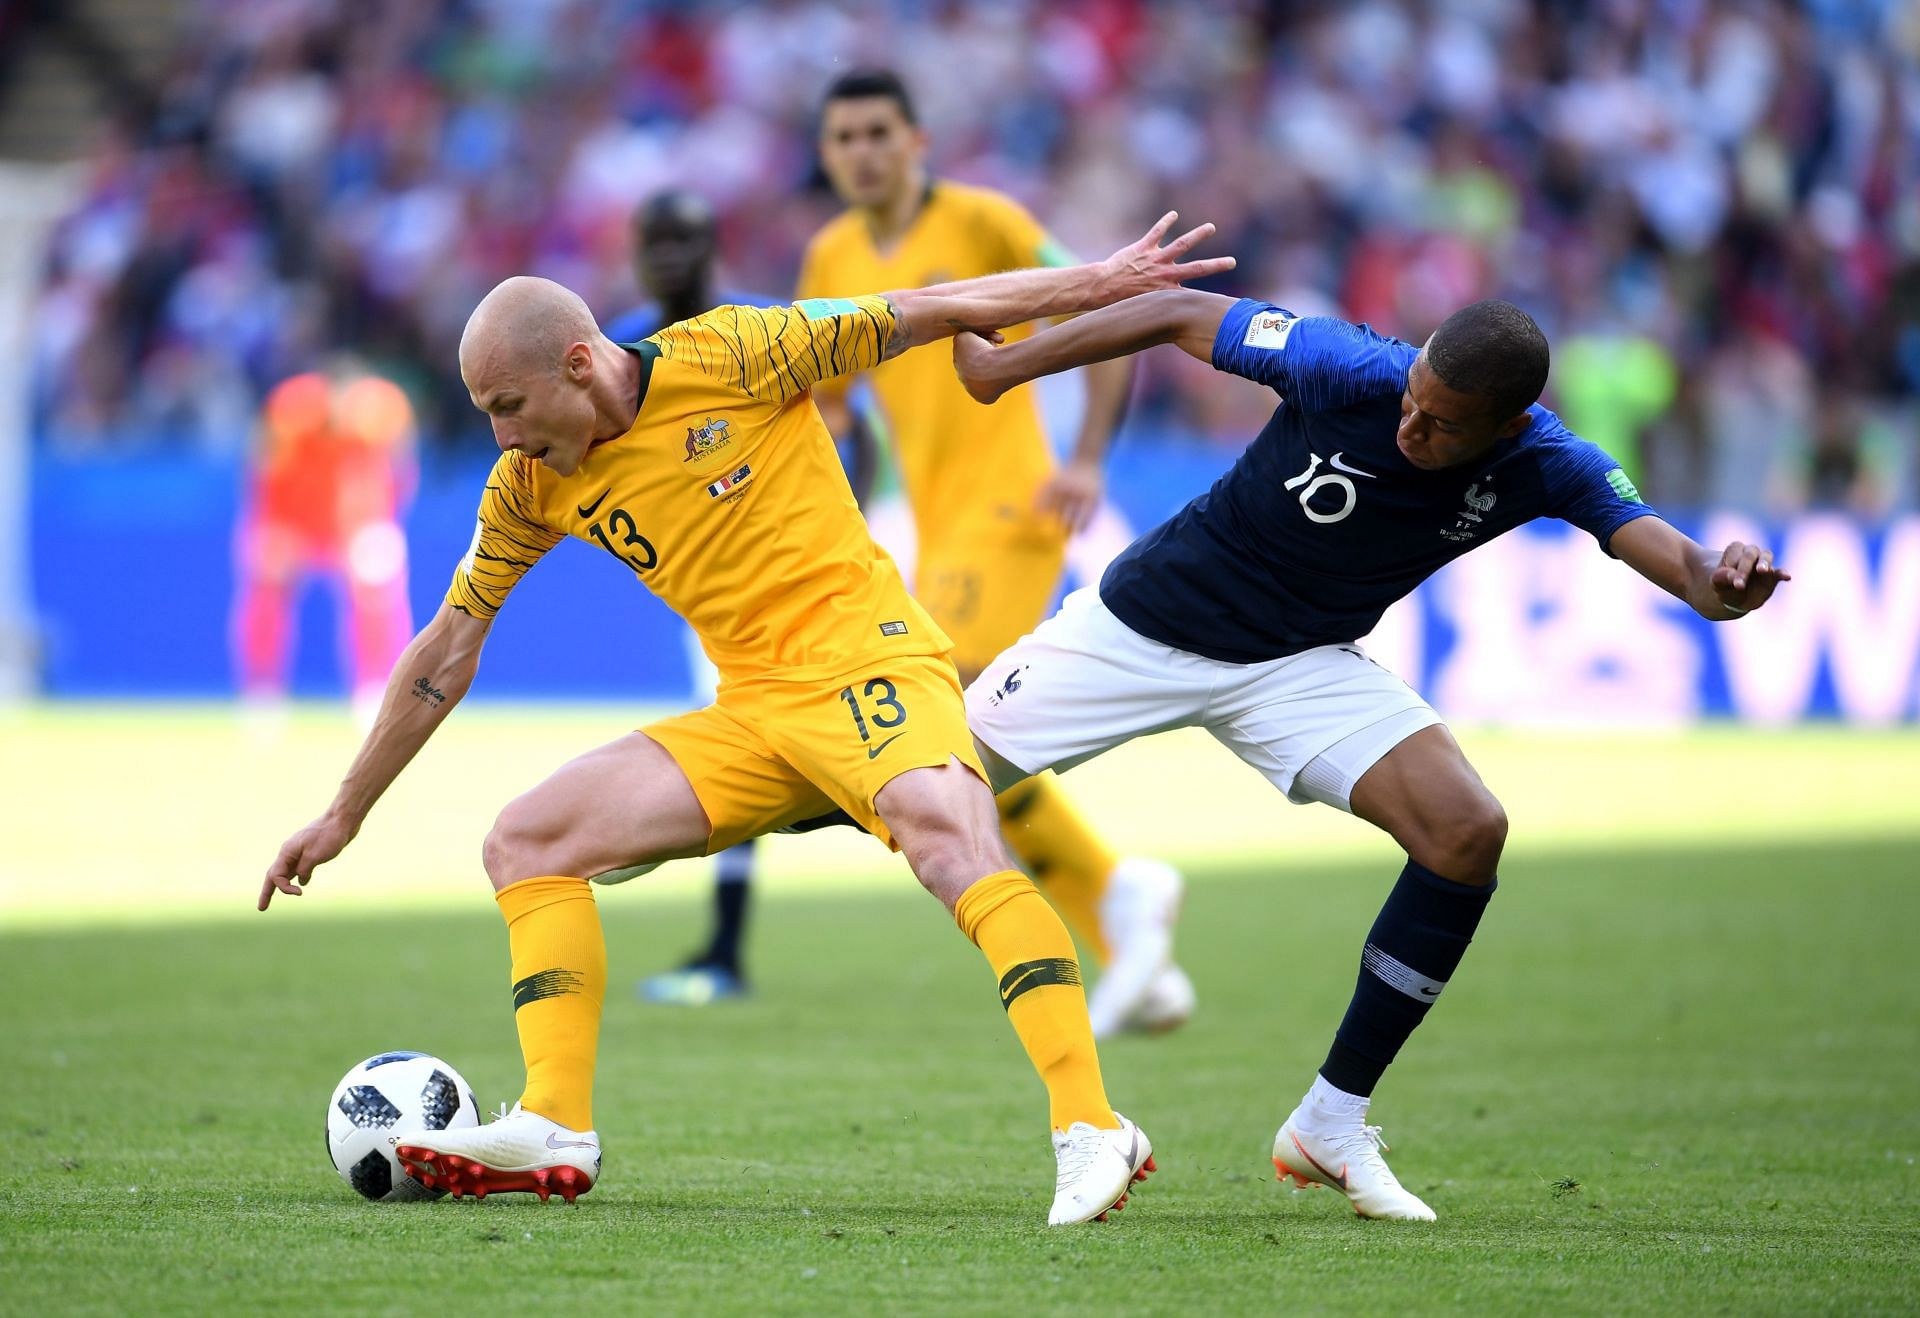 France vs Australia HeadToHead stats and numbers you need to know